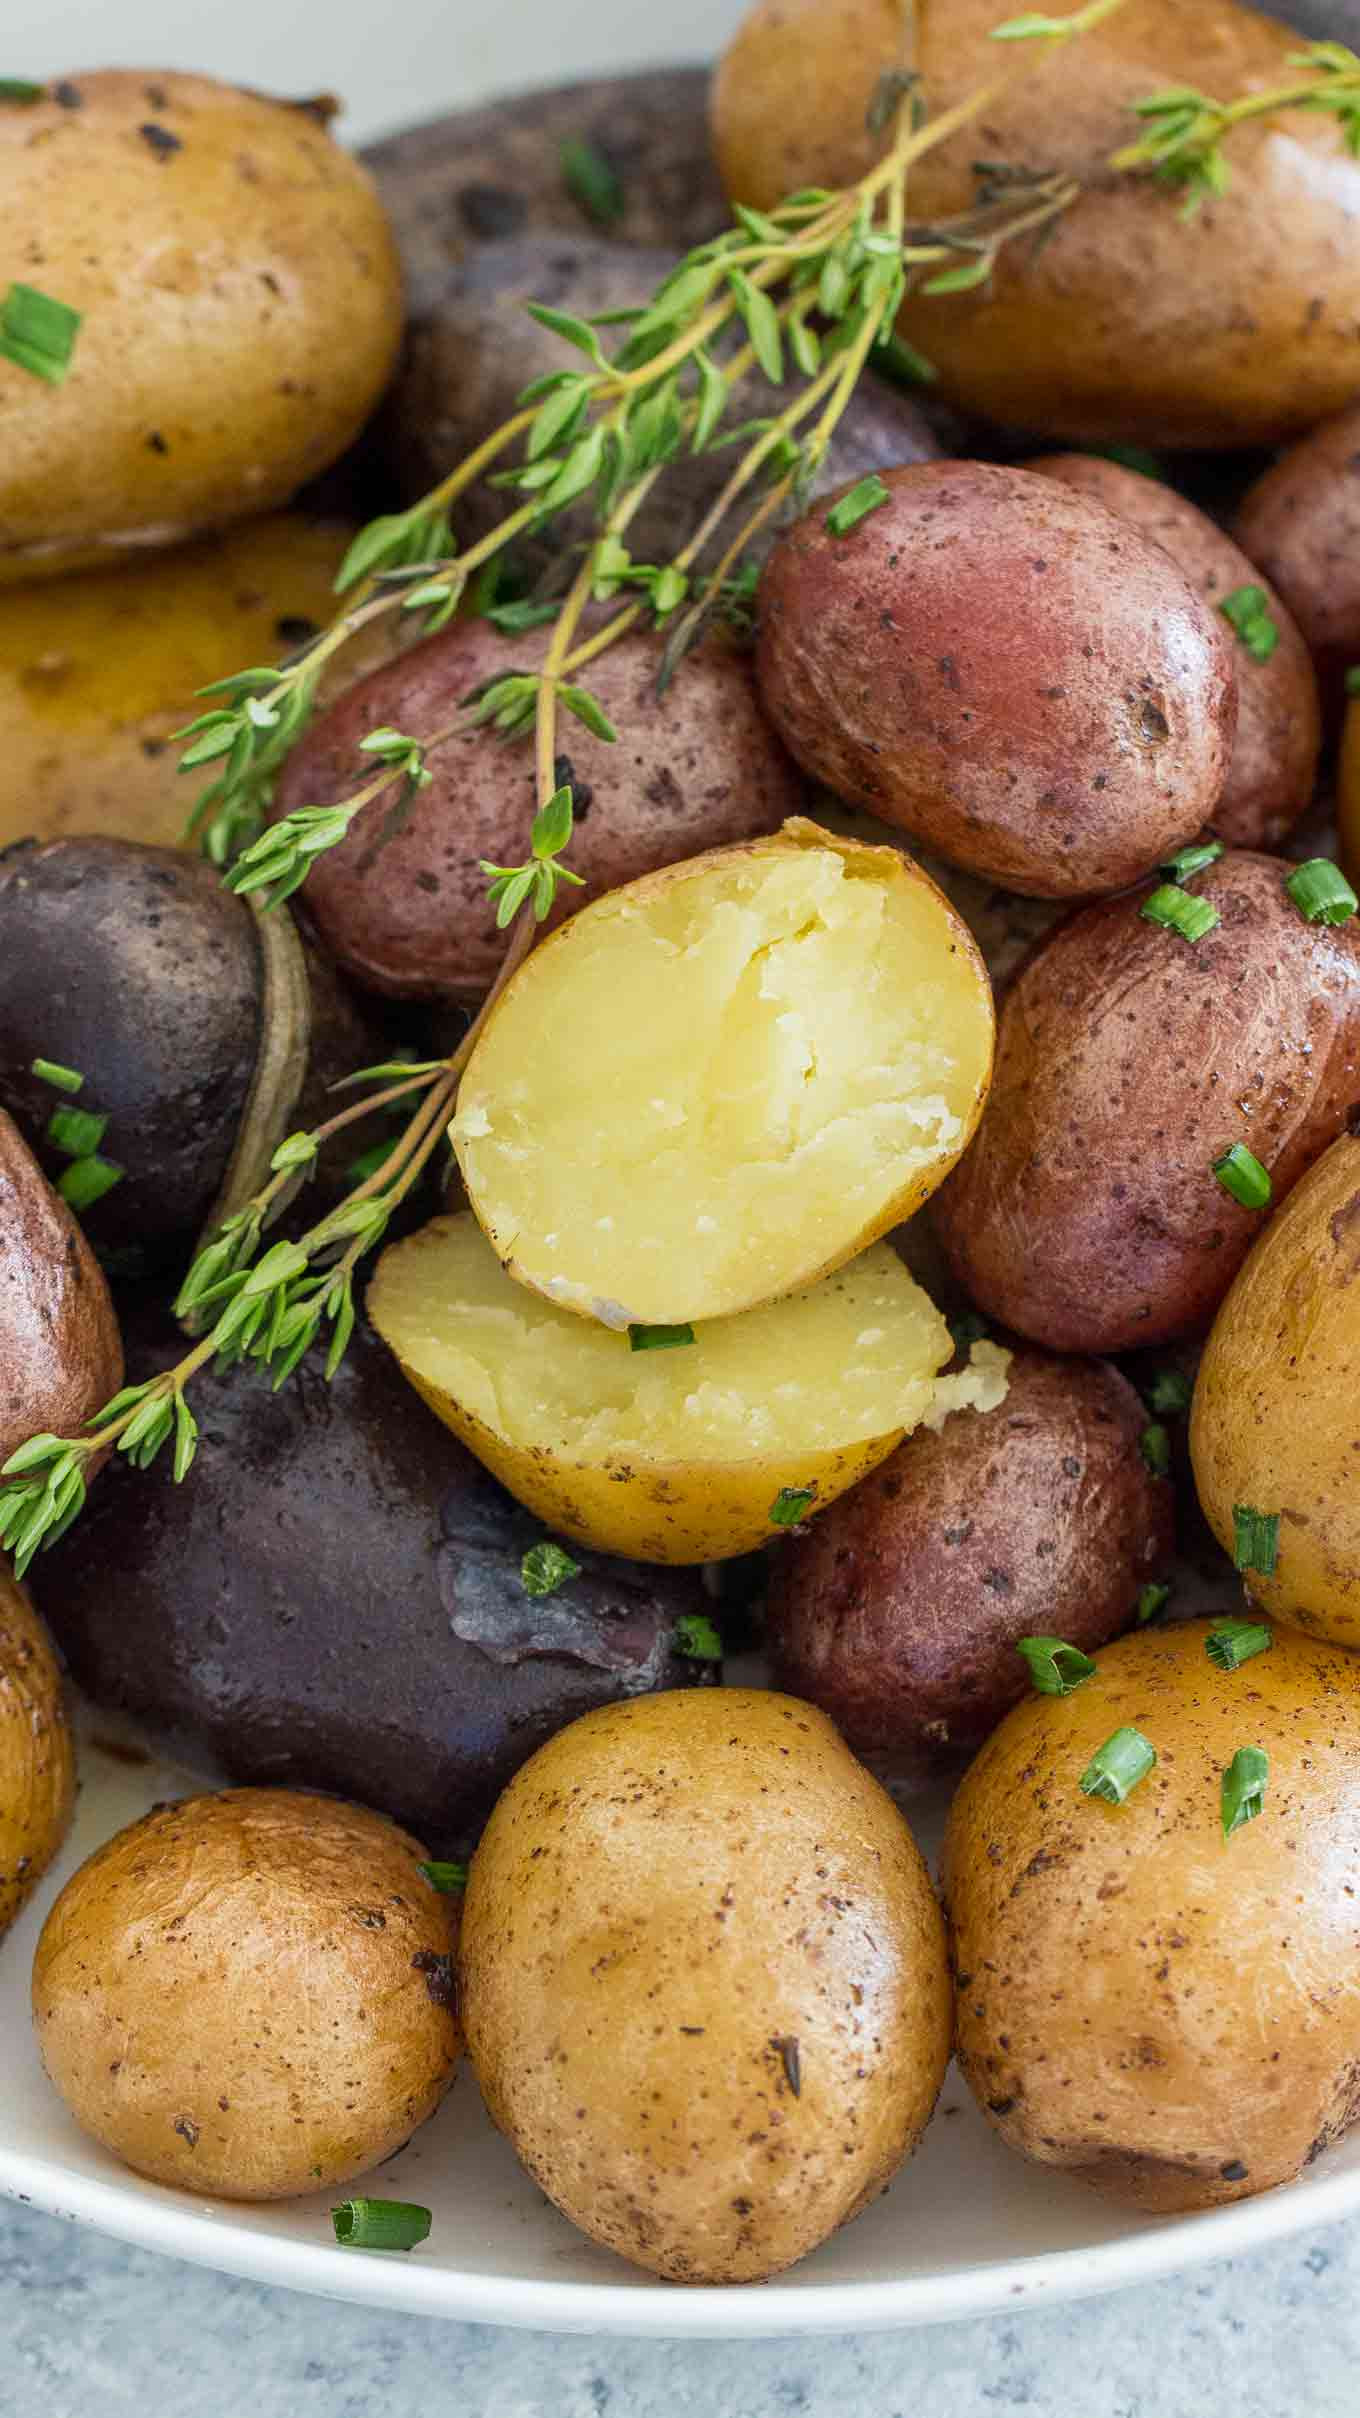 Roasted Potatoes Instant Pot Elegant Instant Pot Roasted Potatoes [video] Sweet and Savory Meals